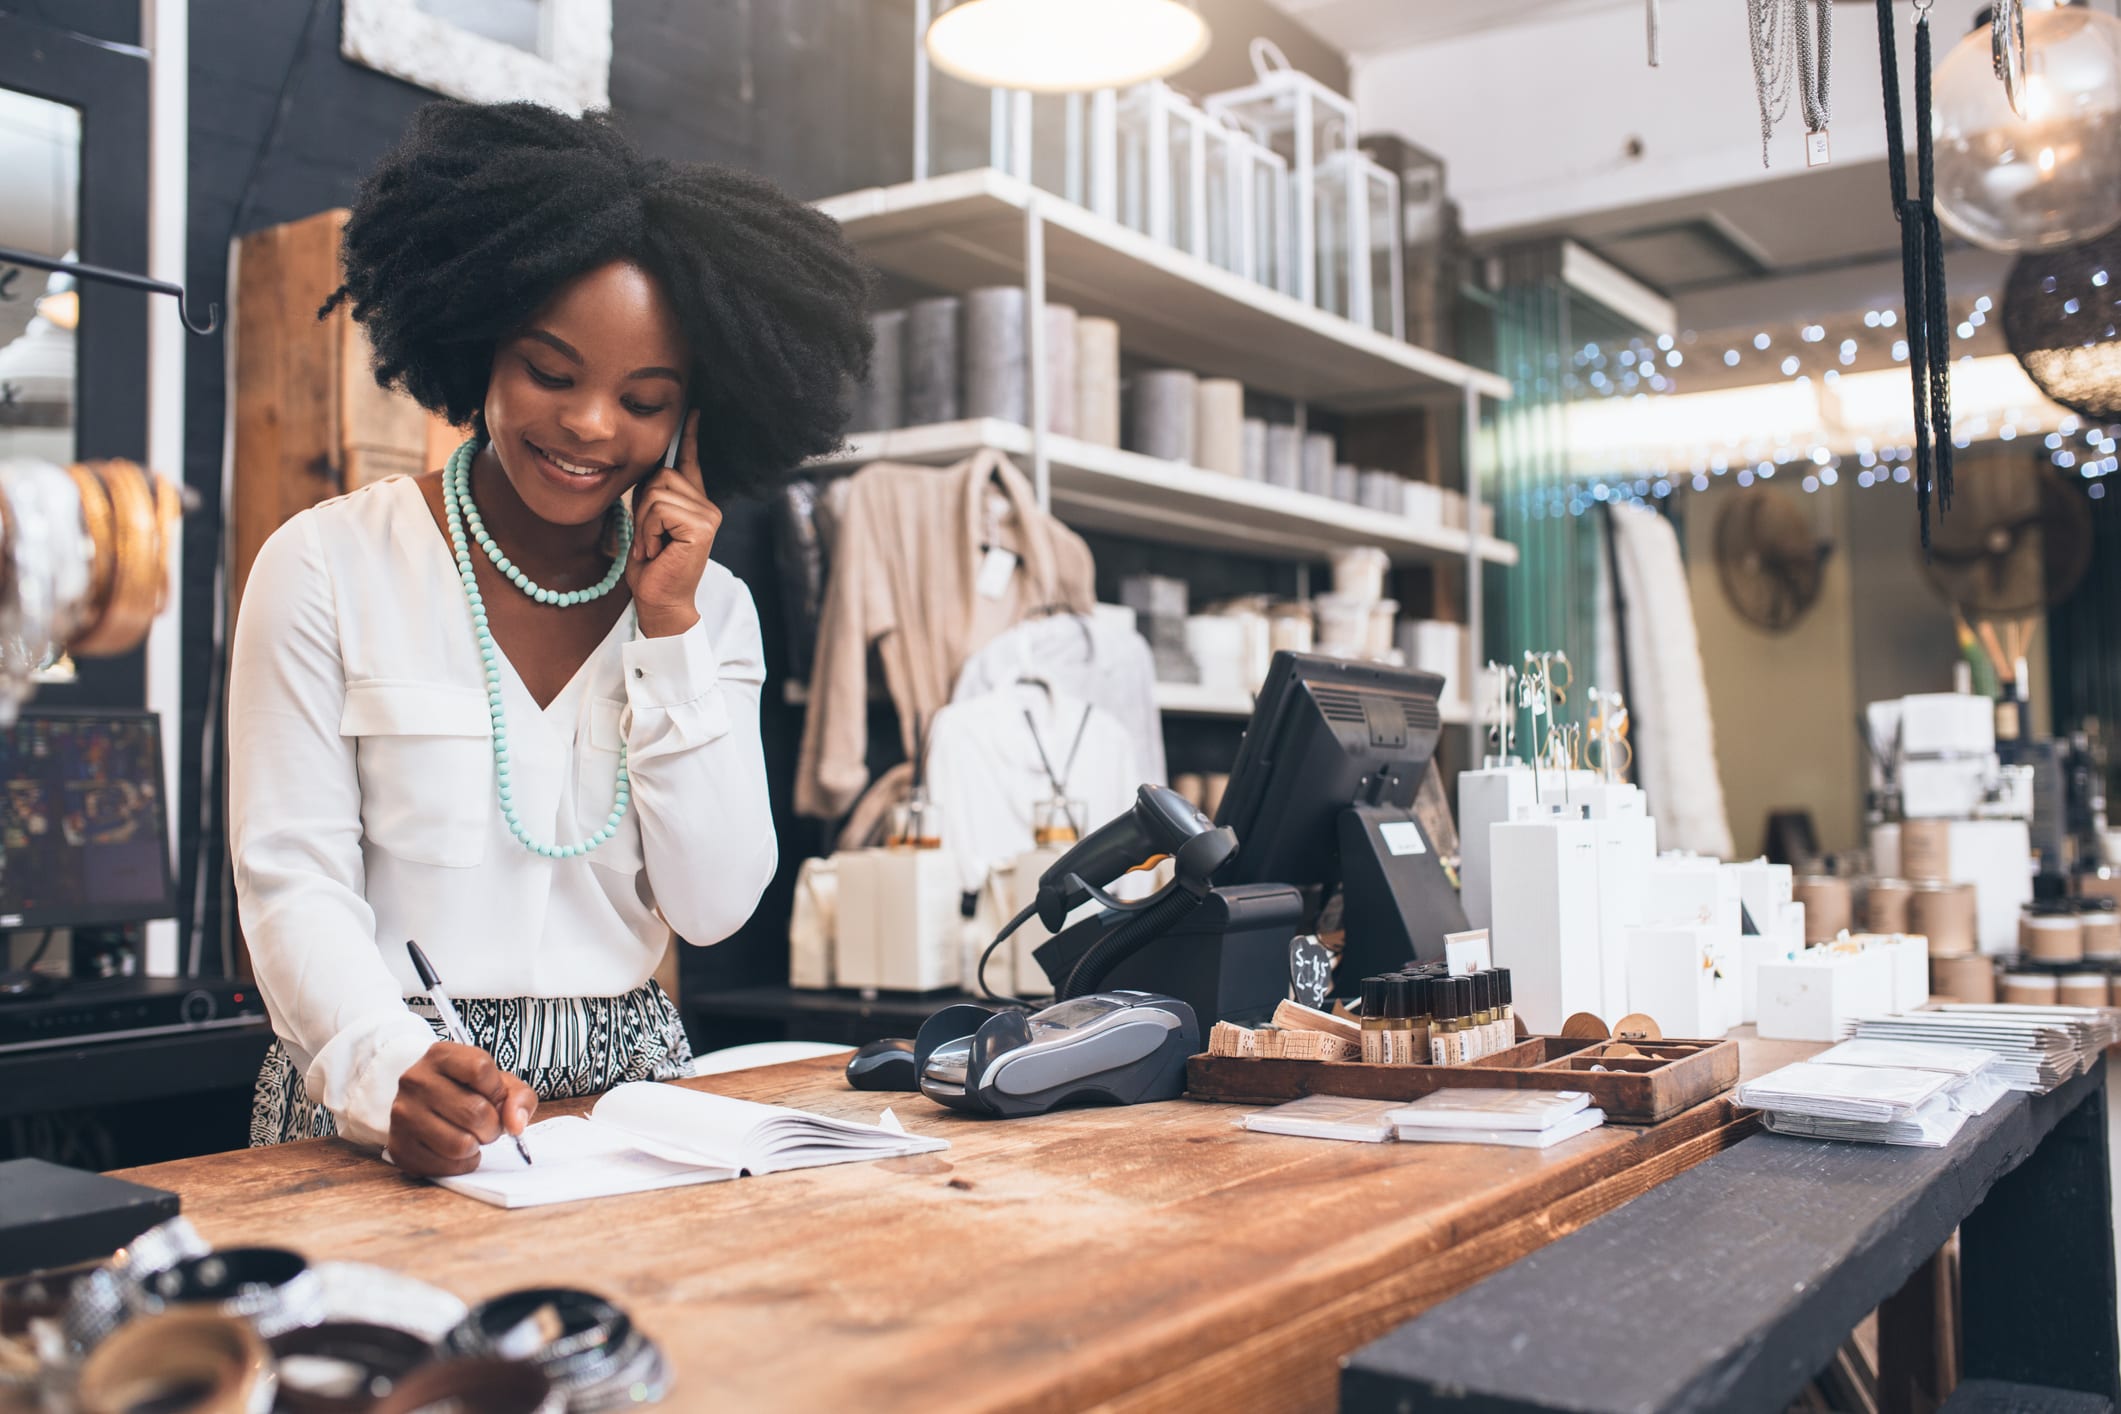 Report: Companies Owned by Women of Color Account for 89 Percent of All New Women-Owned Businesses